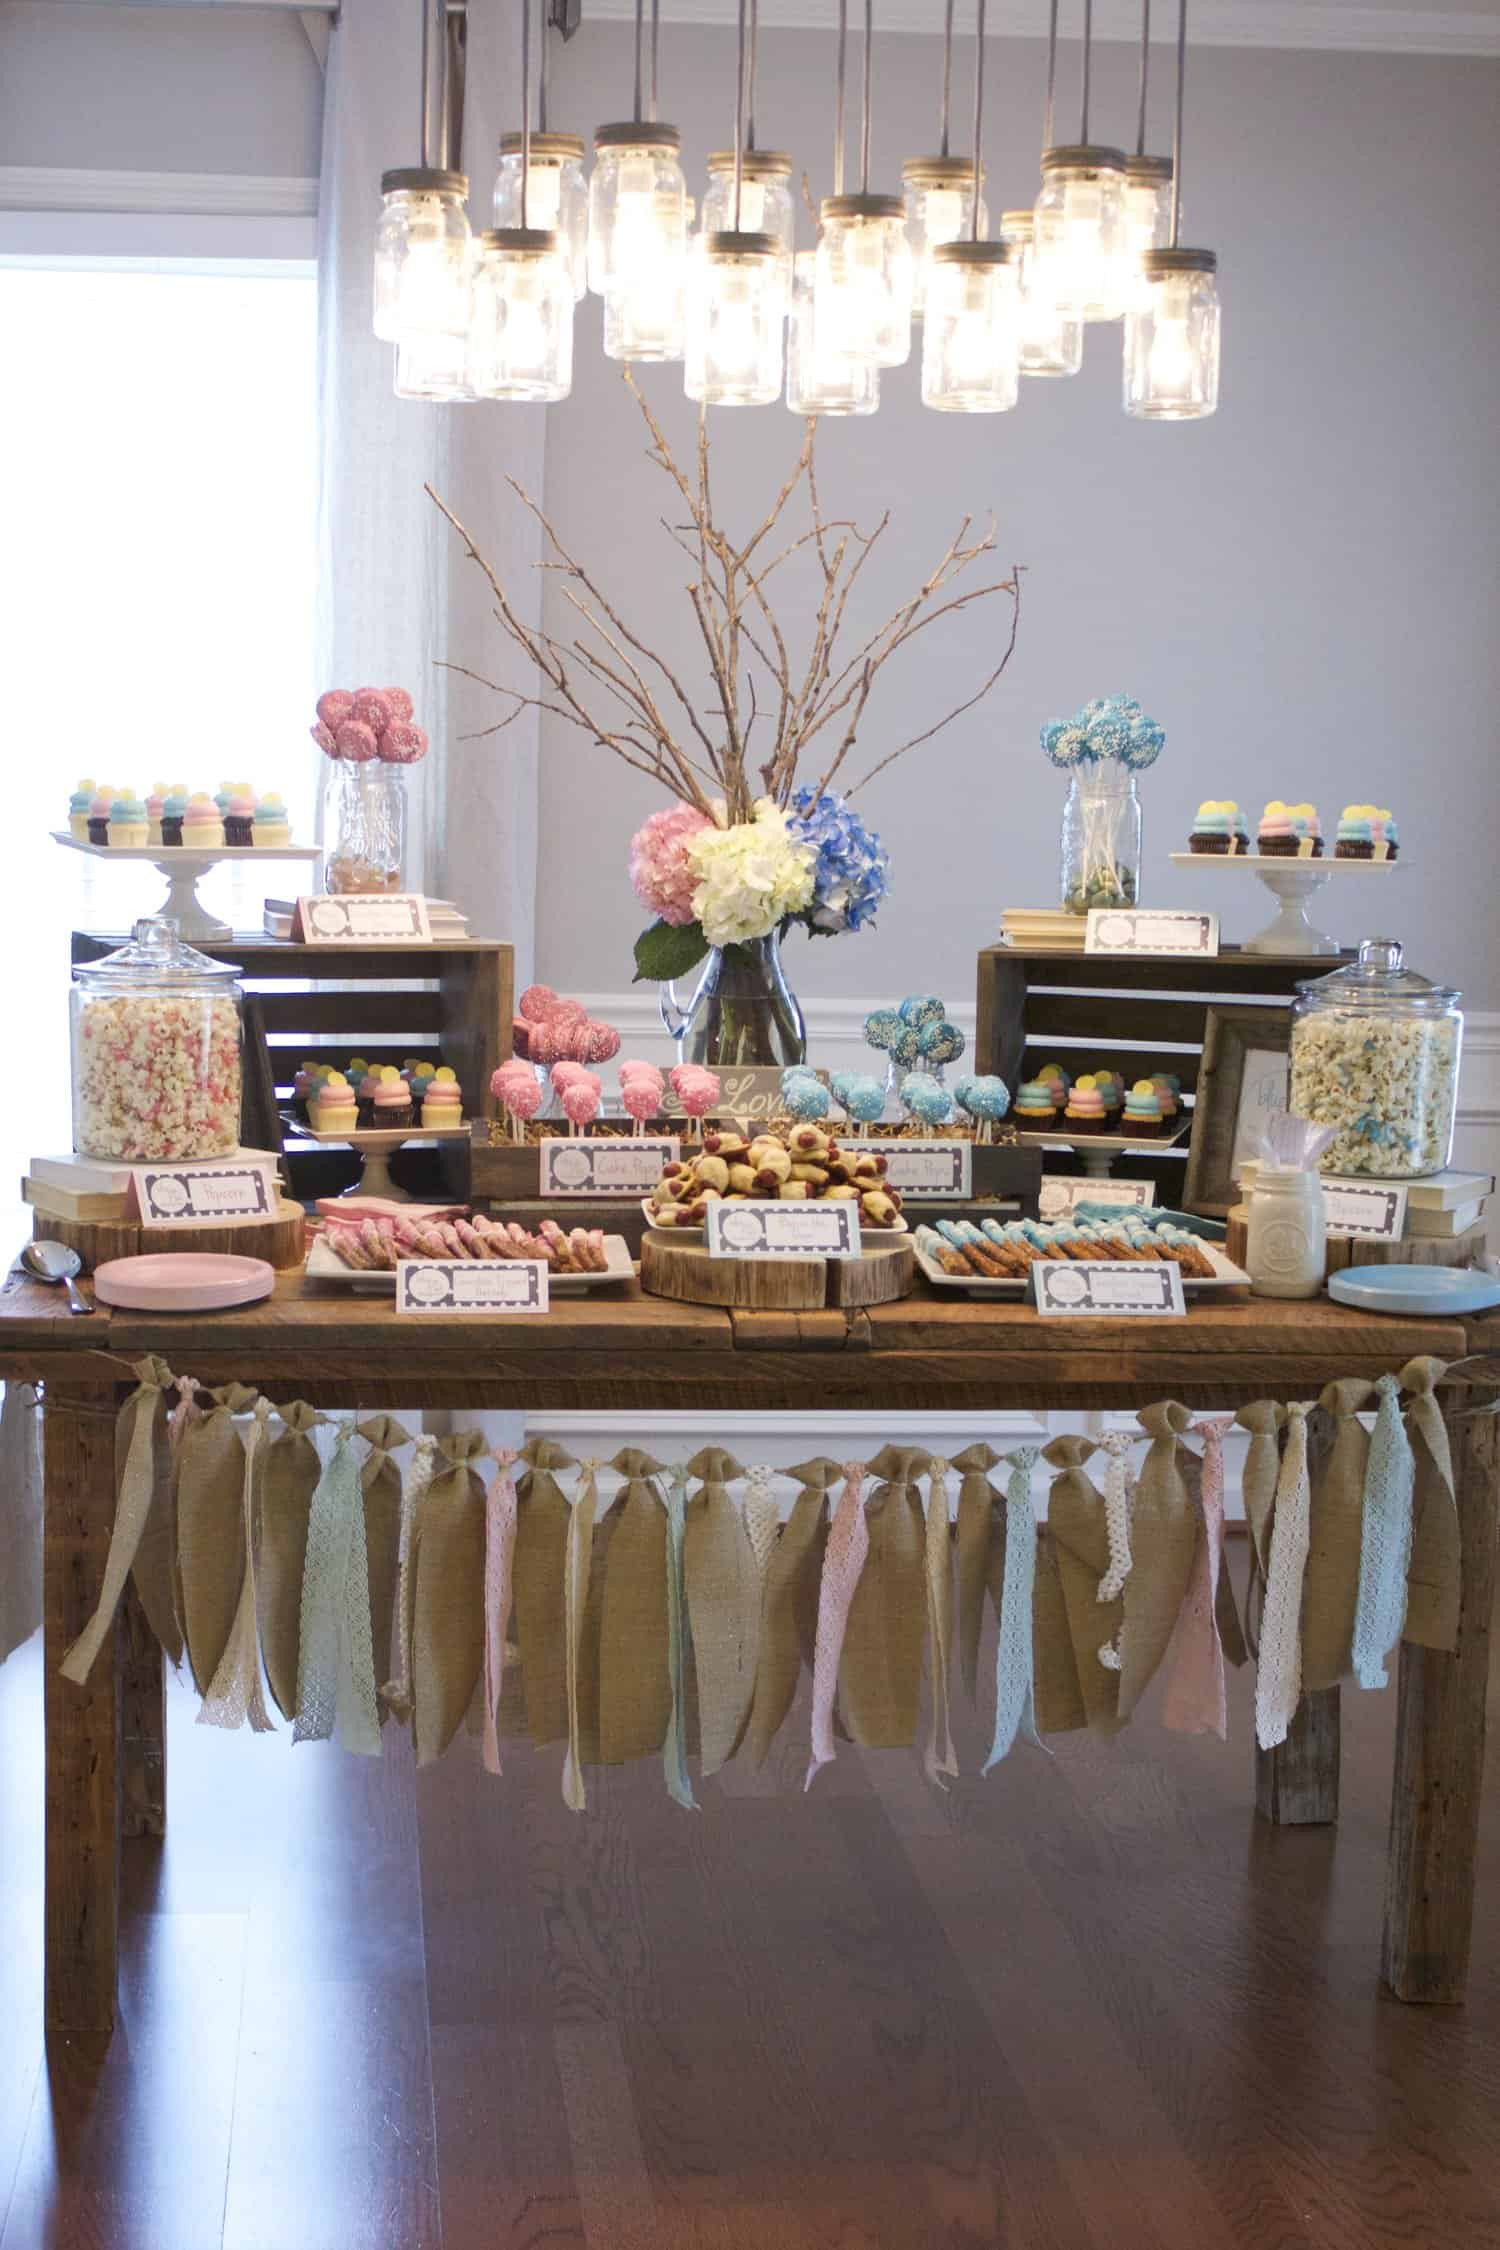 Gender Reveal Party Ideas Country
 17 Tips To Throw An Unfor table Gender Reveal Party